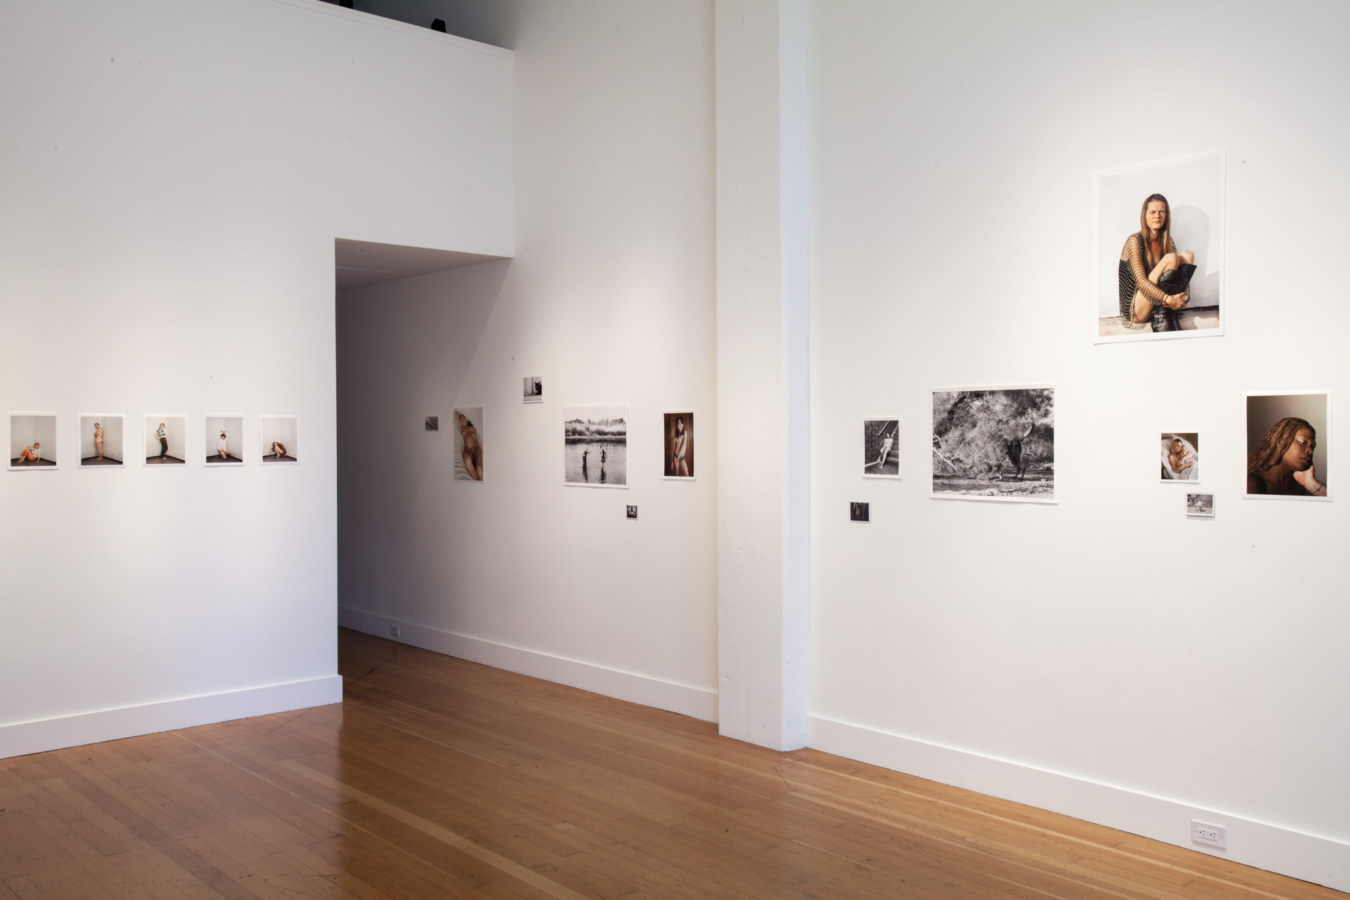 Installation photograph of a gallery space with small unframed prints on the walls